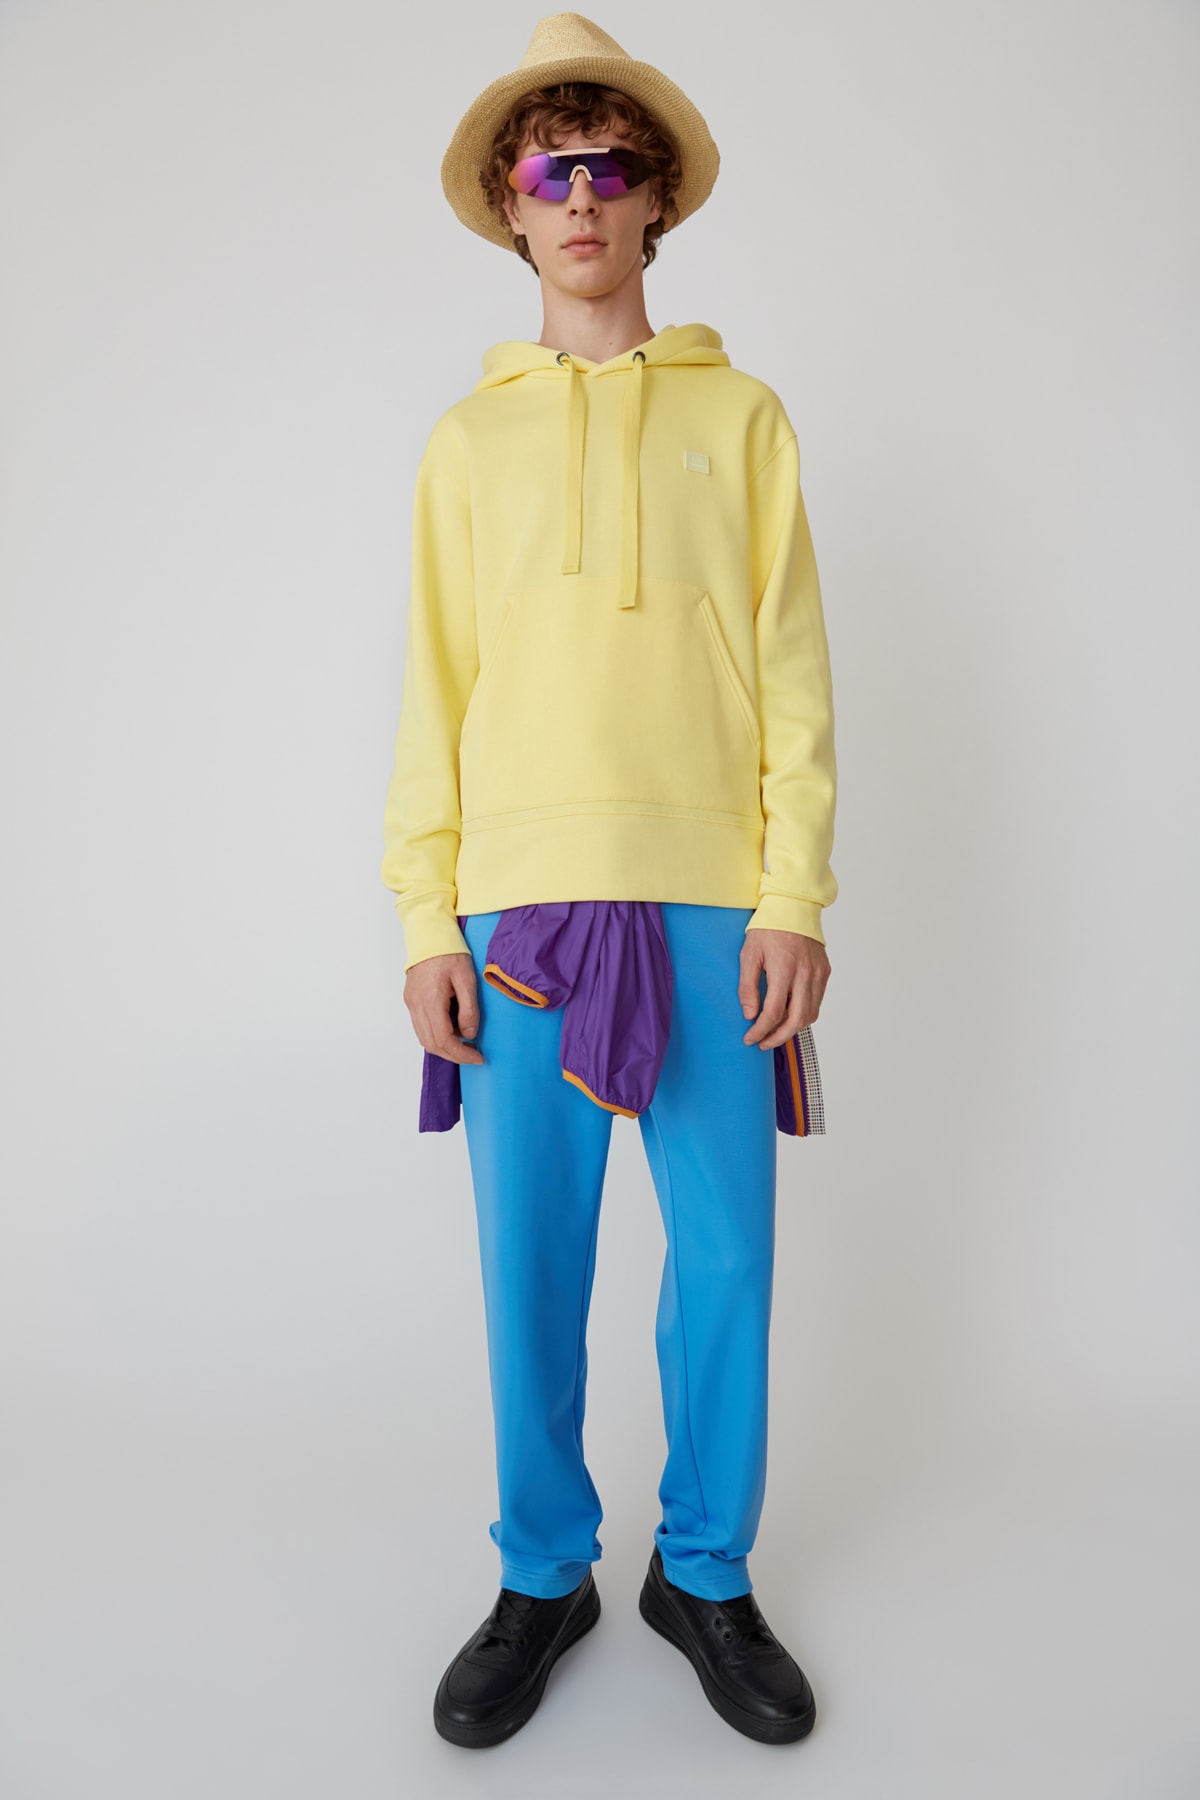 Acne Studios Spring/Summer 2019 Face Collection Hooded Sweatshirt Yellow Pants Blue